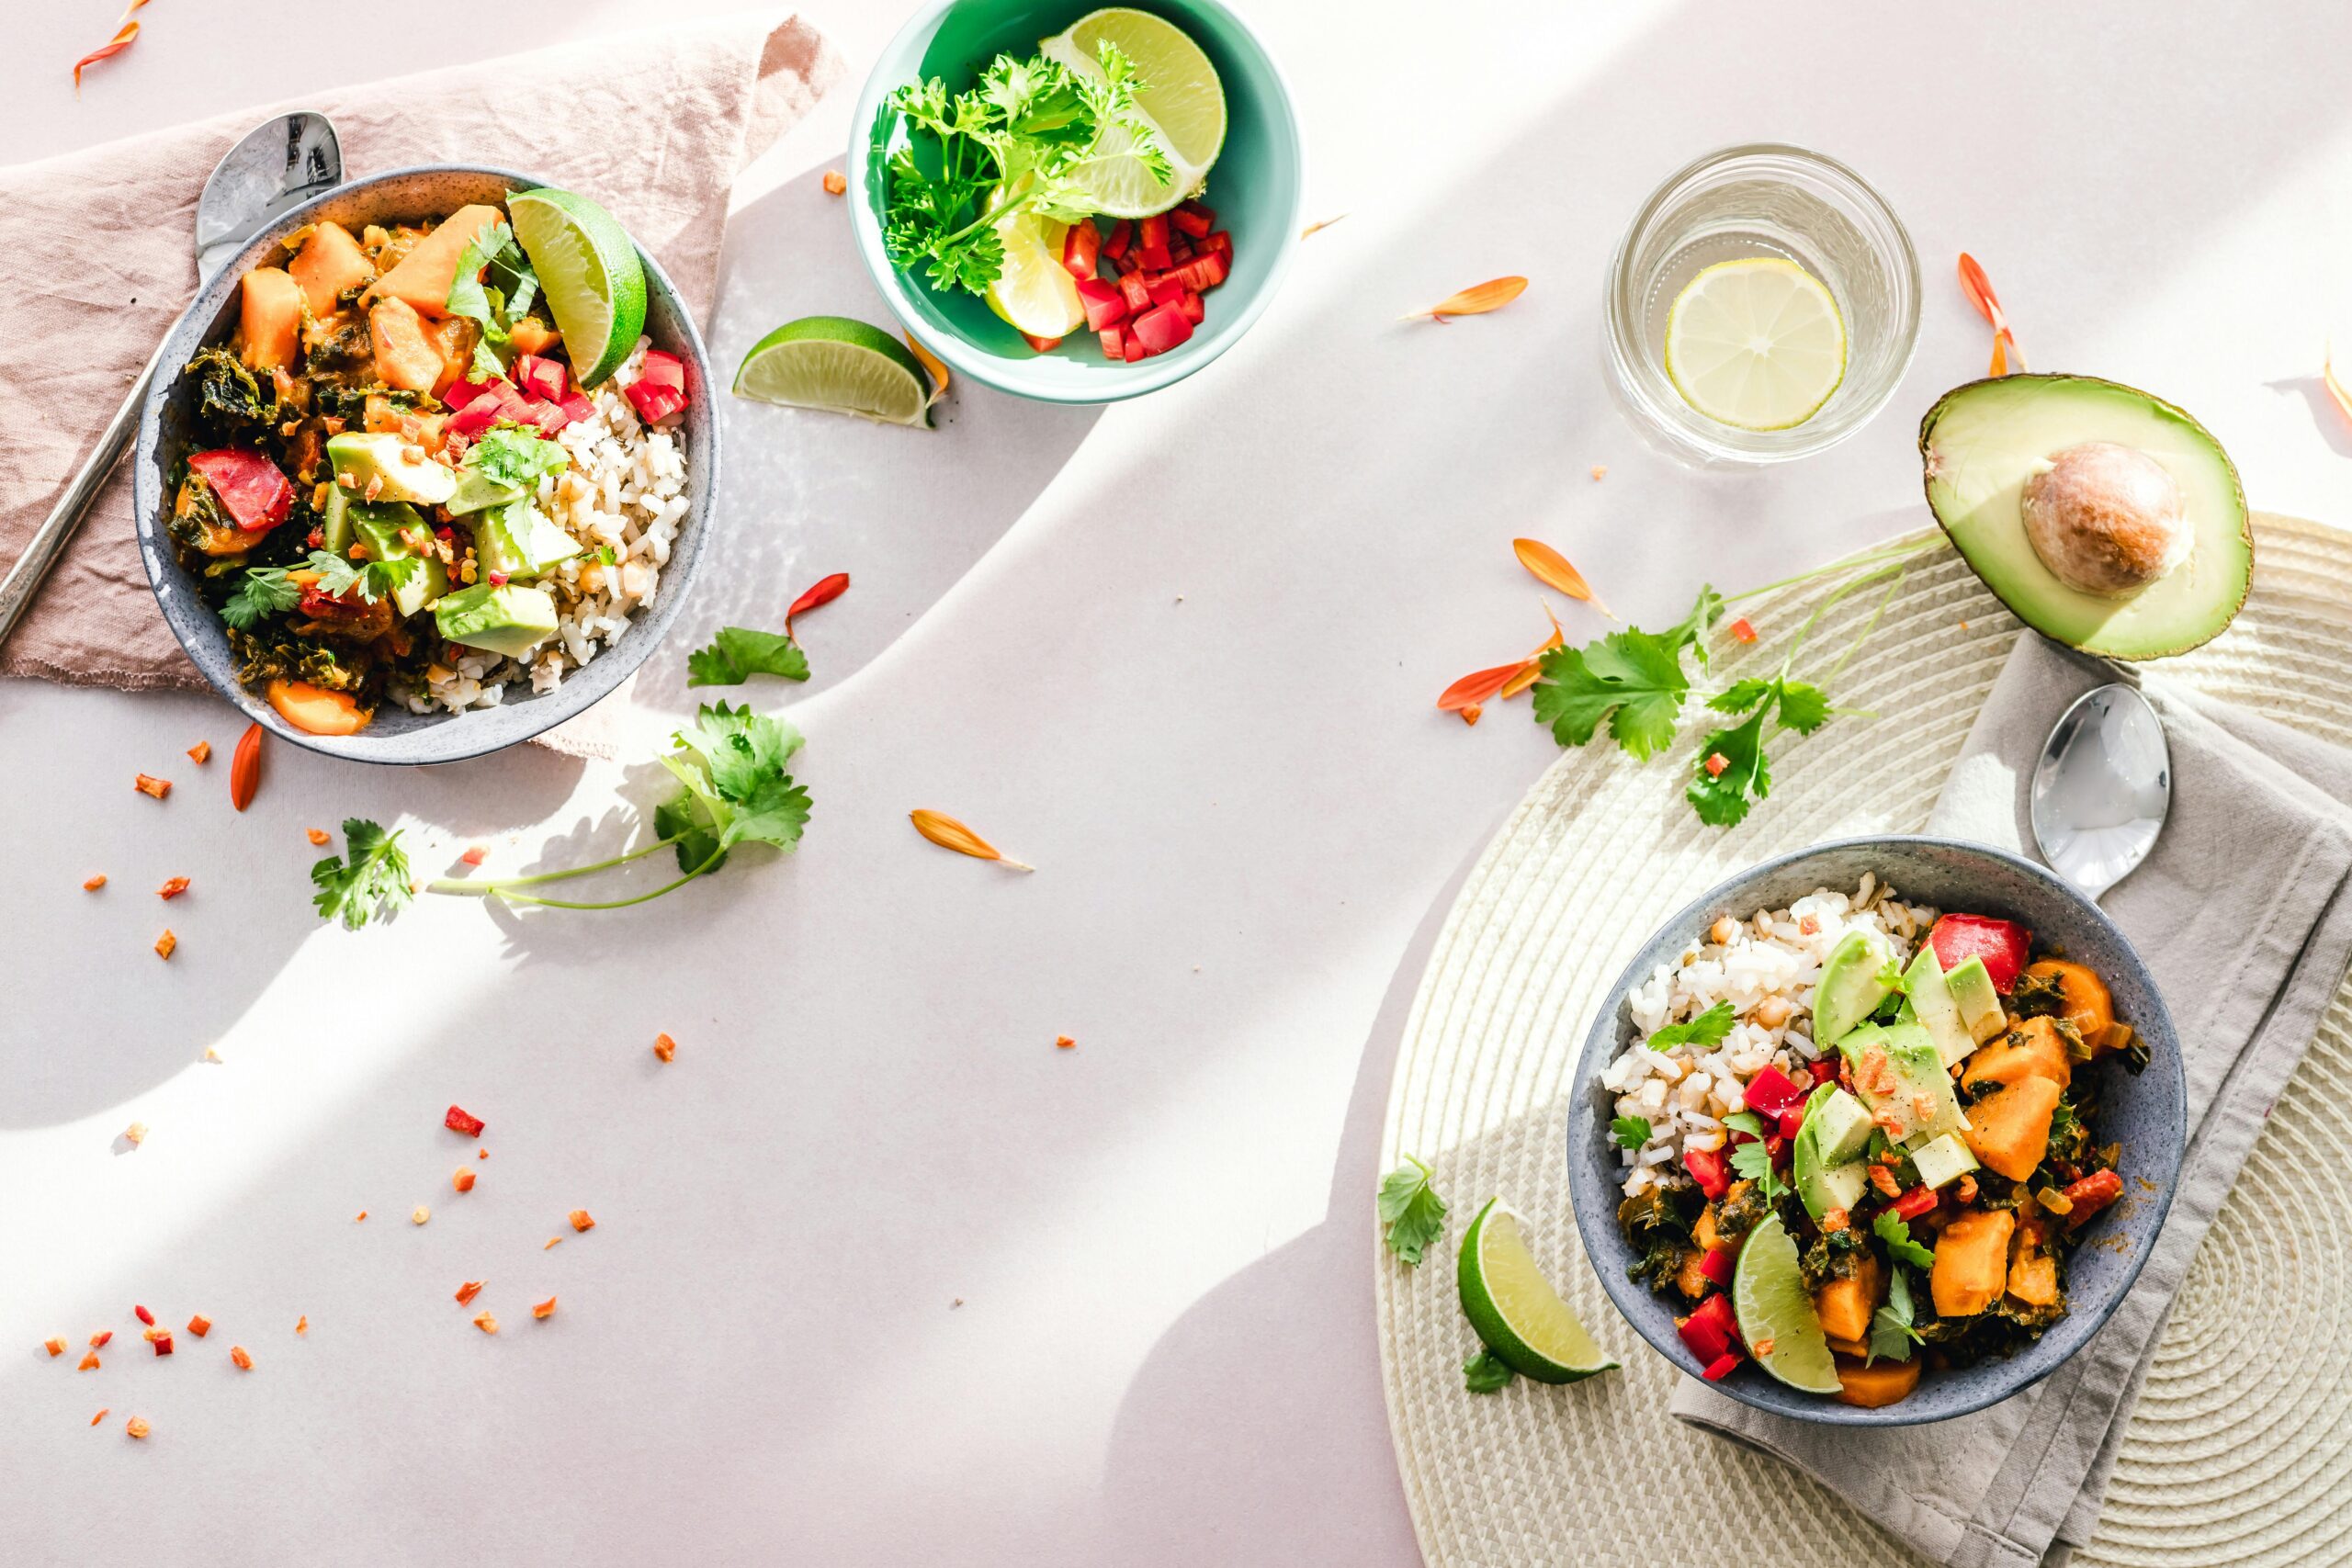 Two bowls of colorful food including avocado, rice, and vegetables are on a light surface with scattered herbs and lime wedges. Nearby, a bowl of lime slices and a glass of lemon water reflect the vibrancy of community dining.